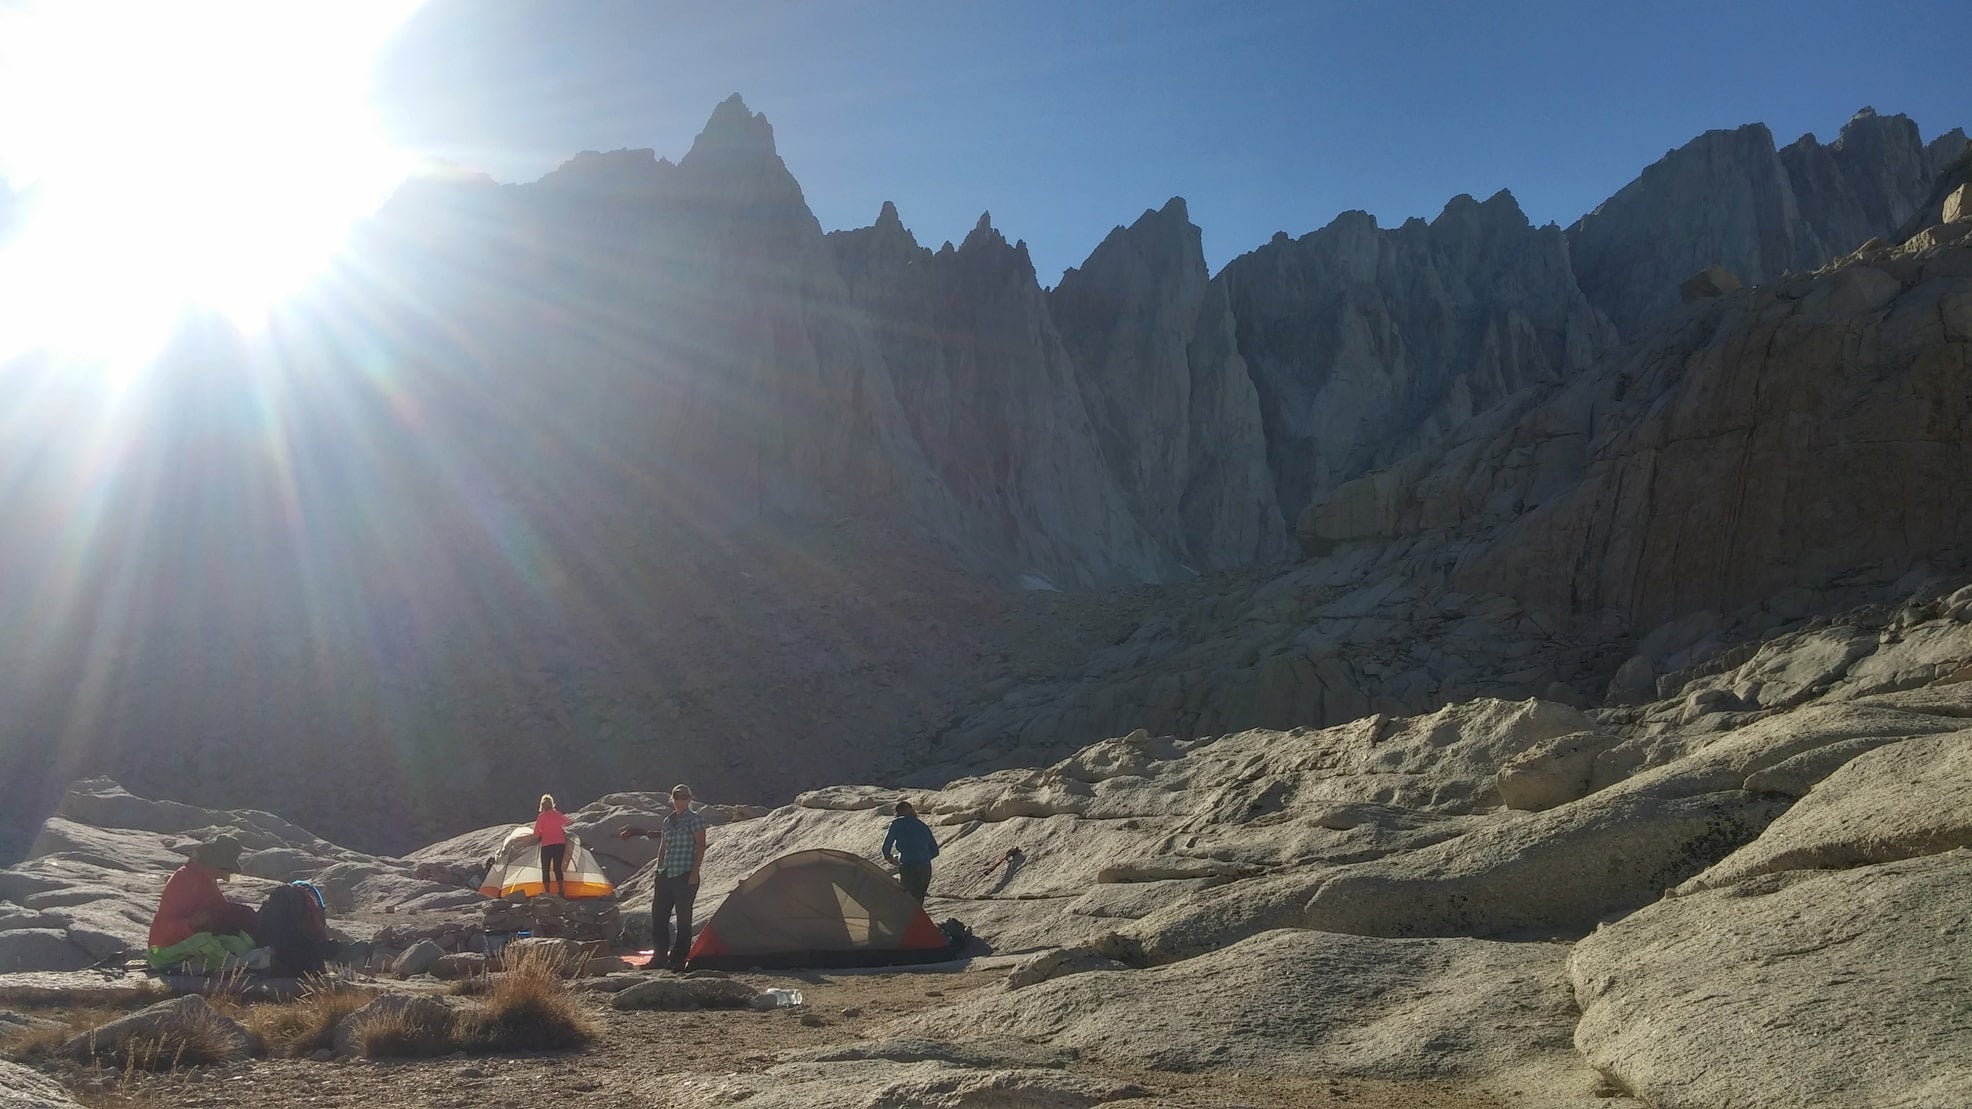 Shining sun peaking out from the jagged Sierra range with cmapers hanging out around tents in the forgeground.